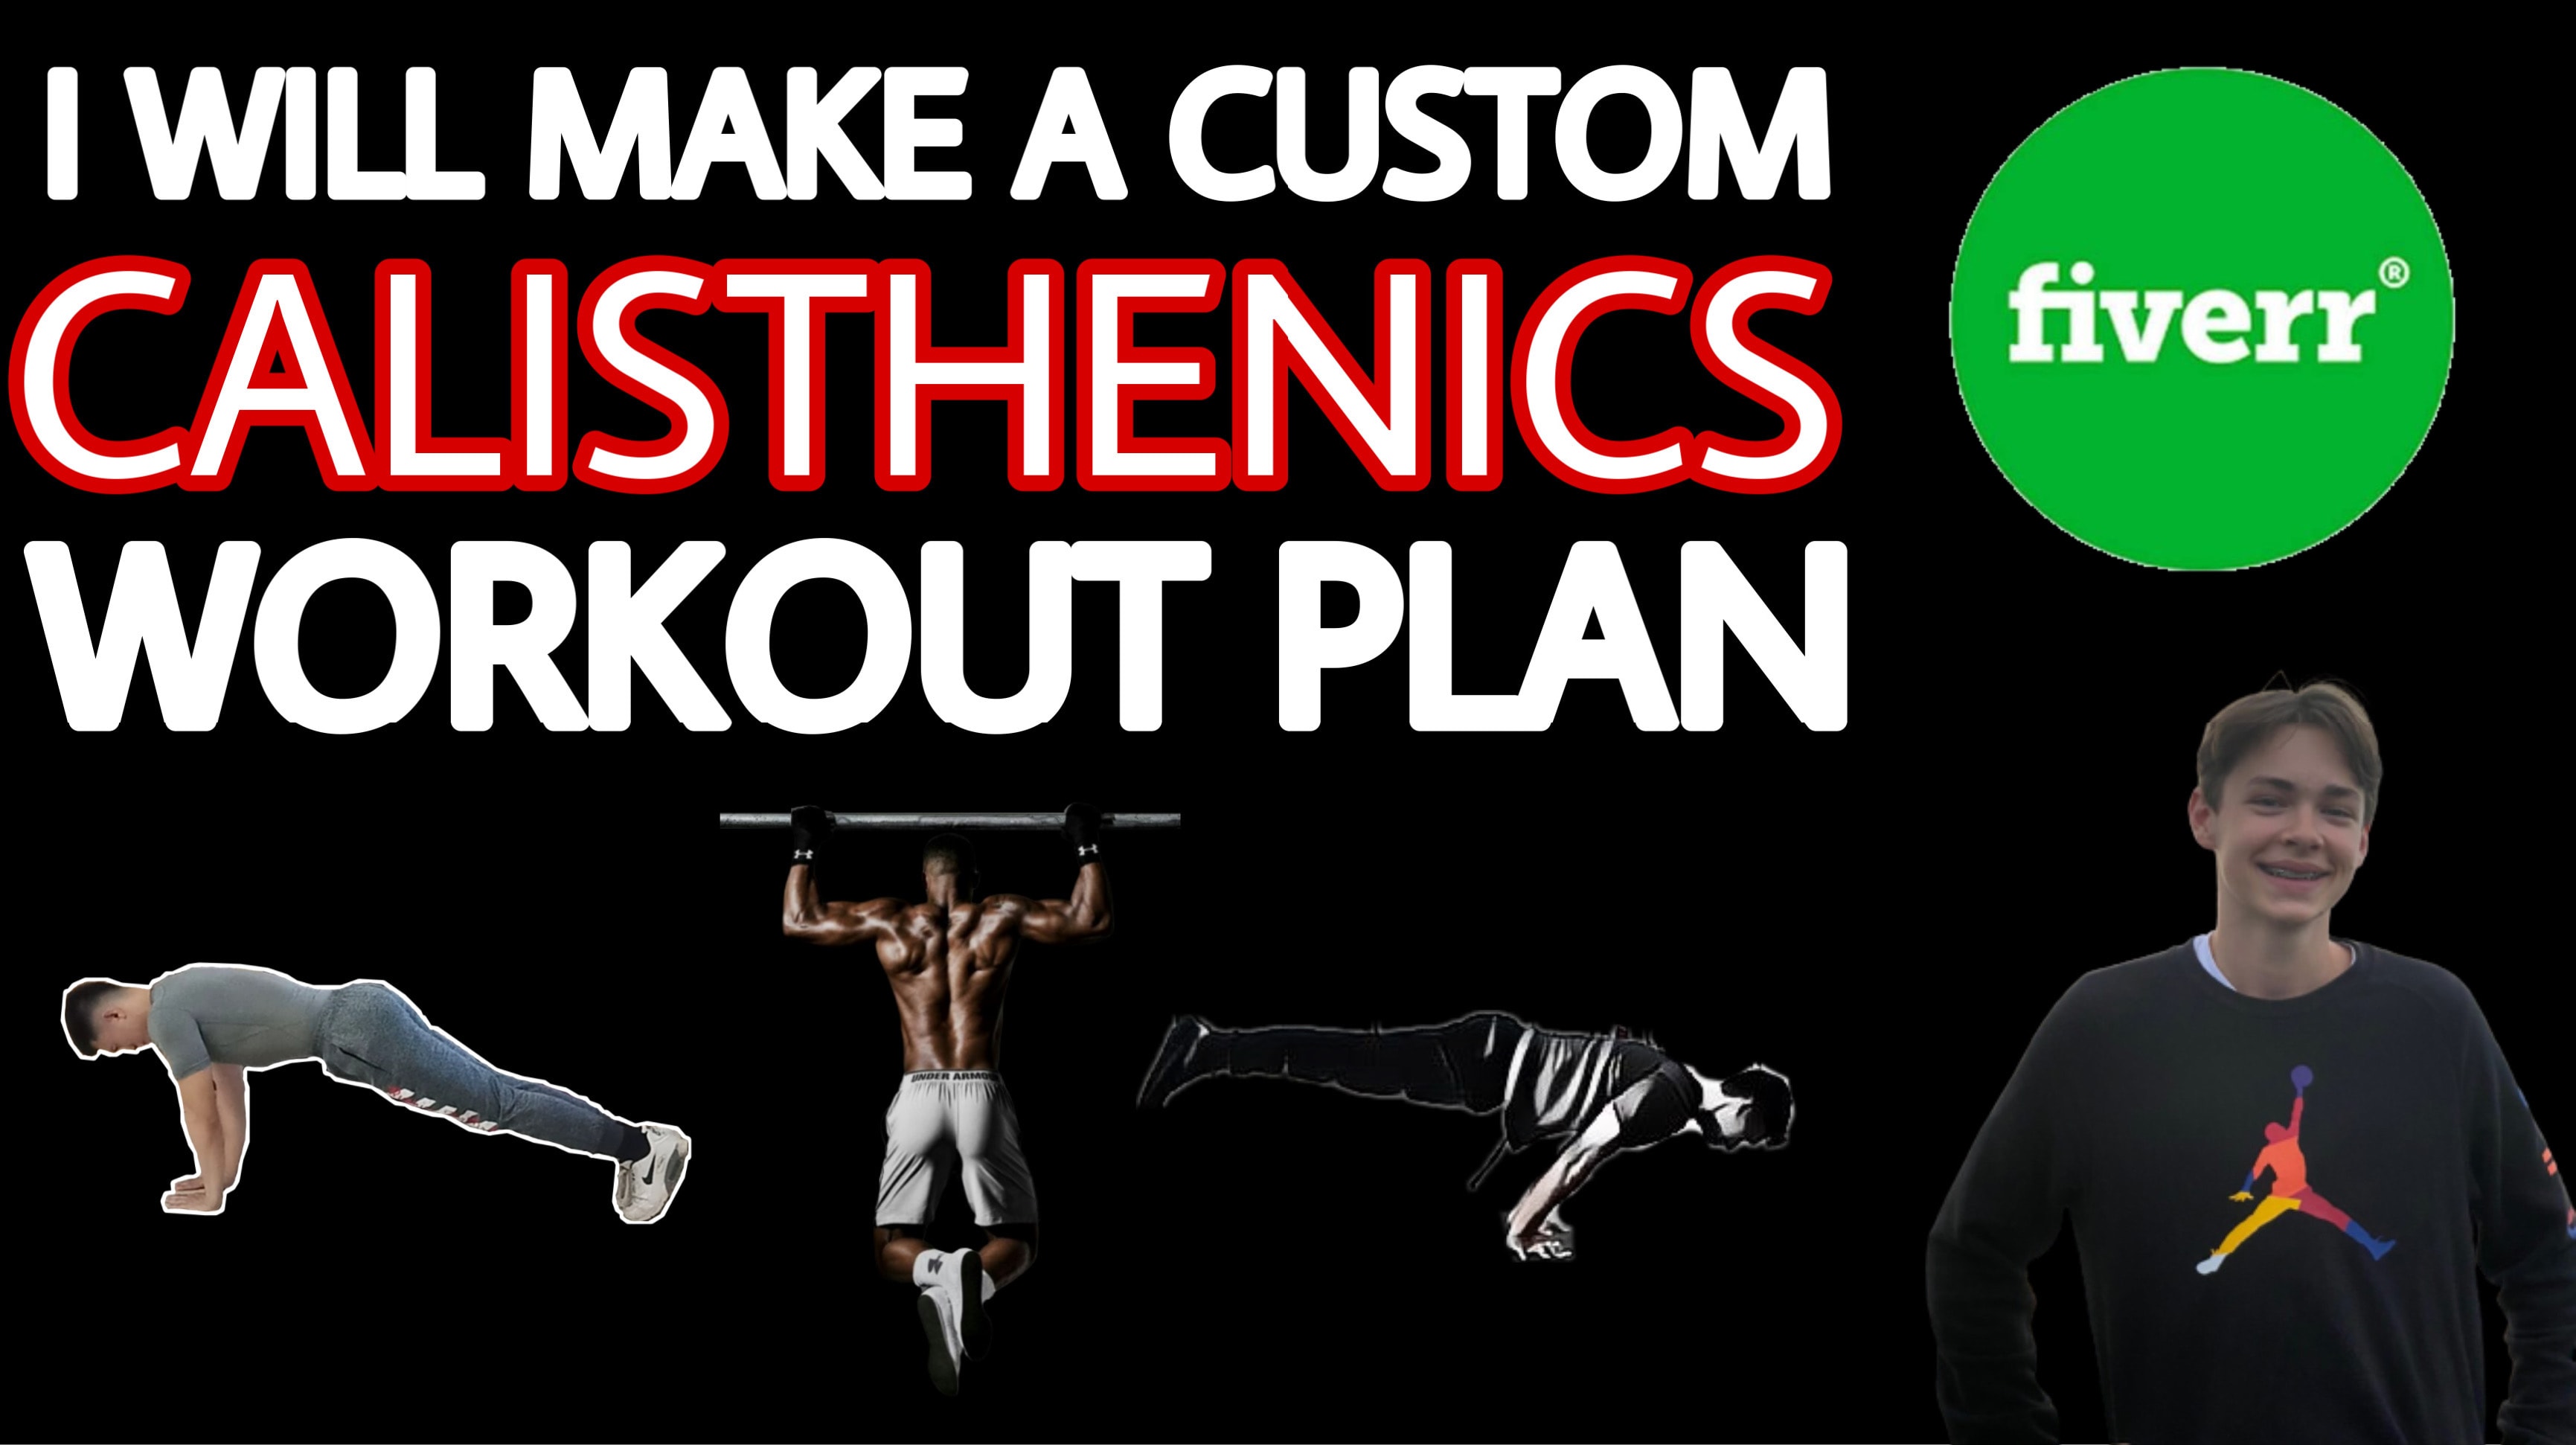 How To Do Calisthenics At Home